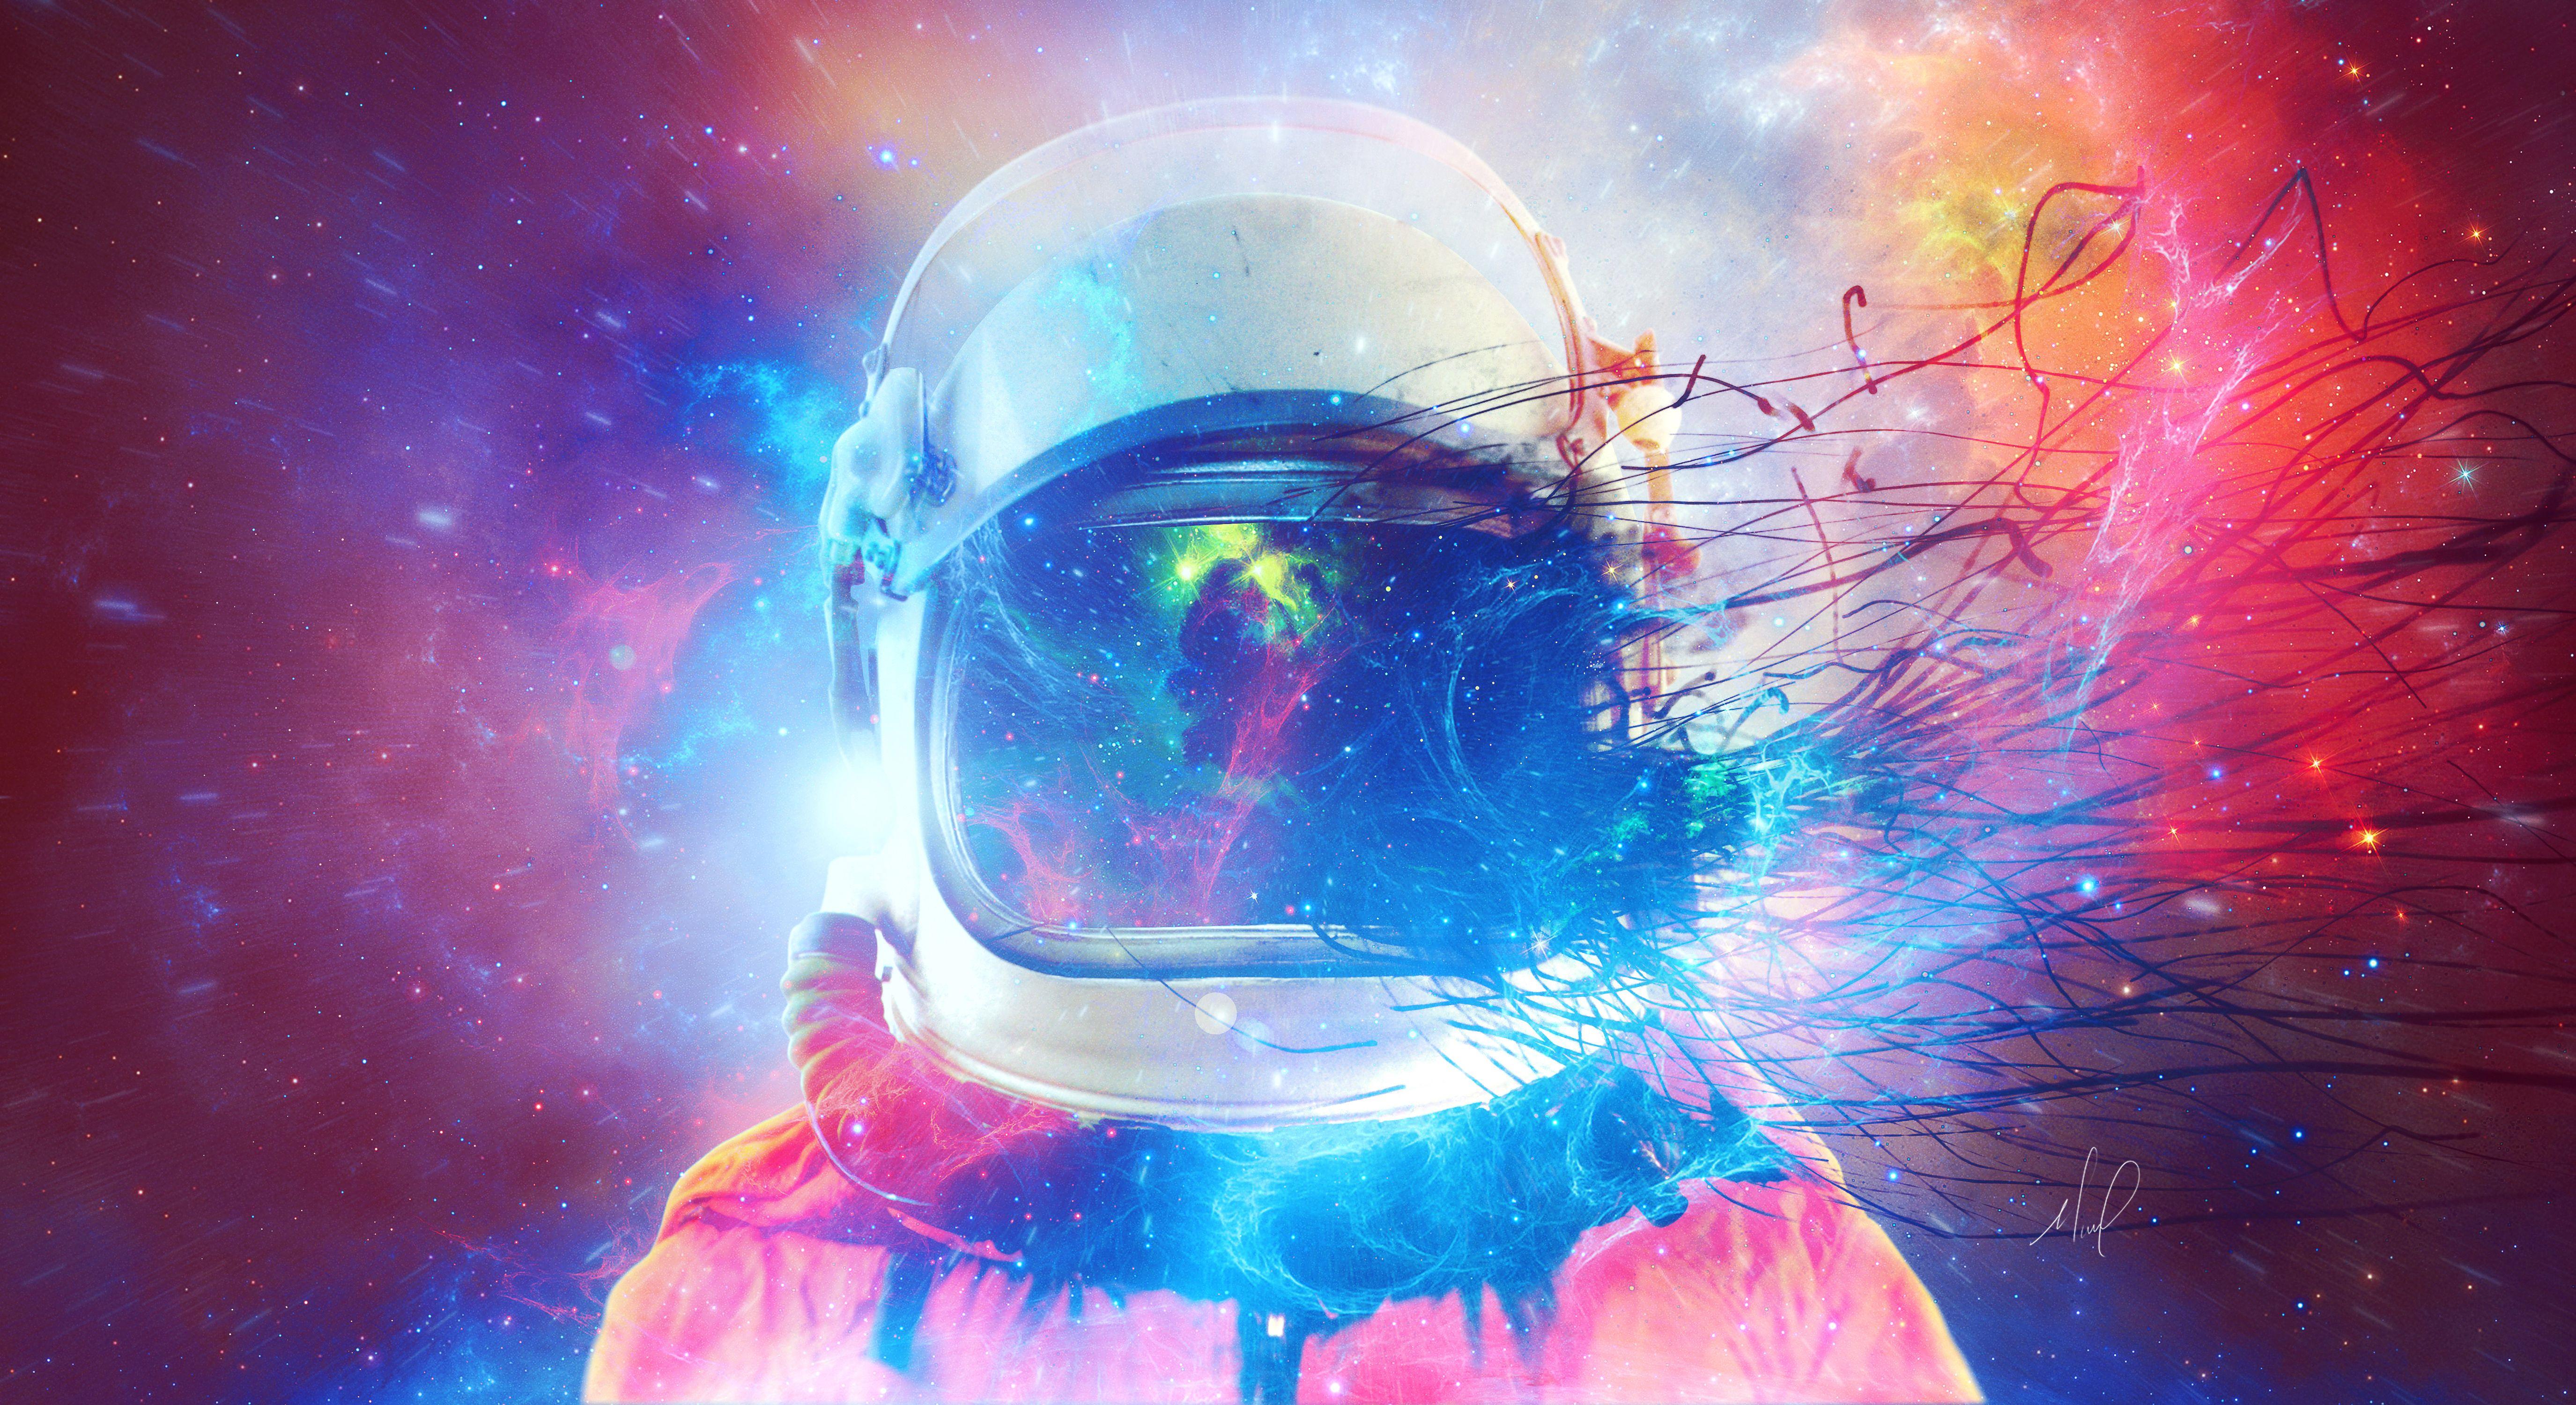 Astronaut In The Ocean Live Wallpaper For Pc : Astronaut Pc Wallpapers